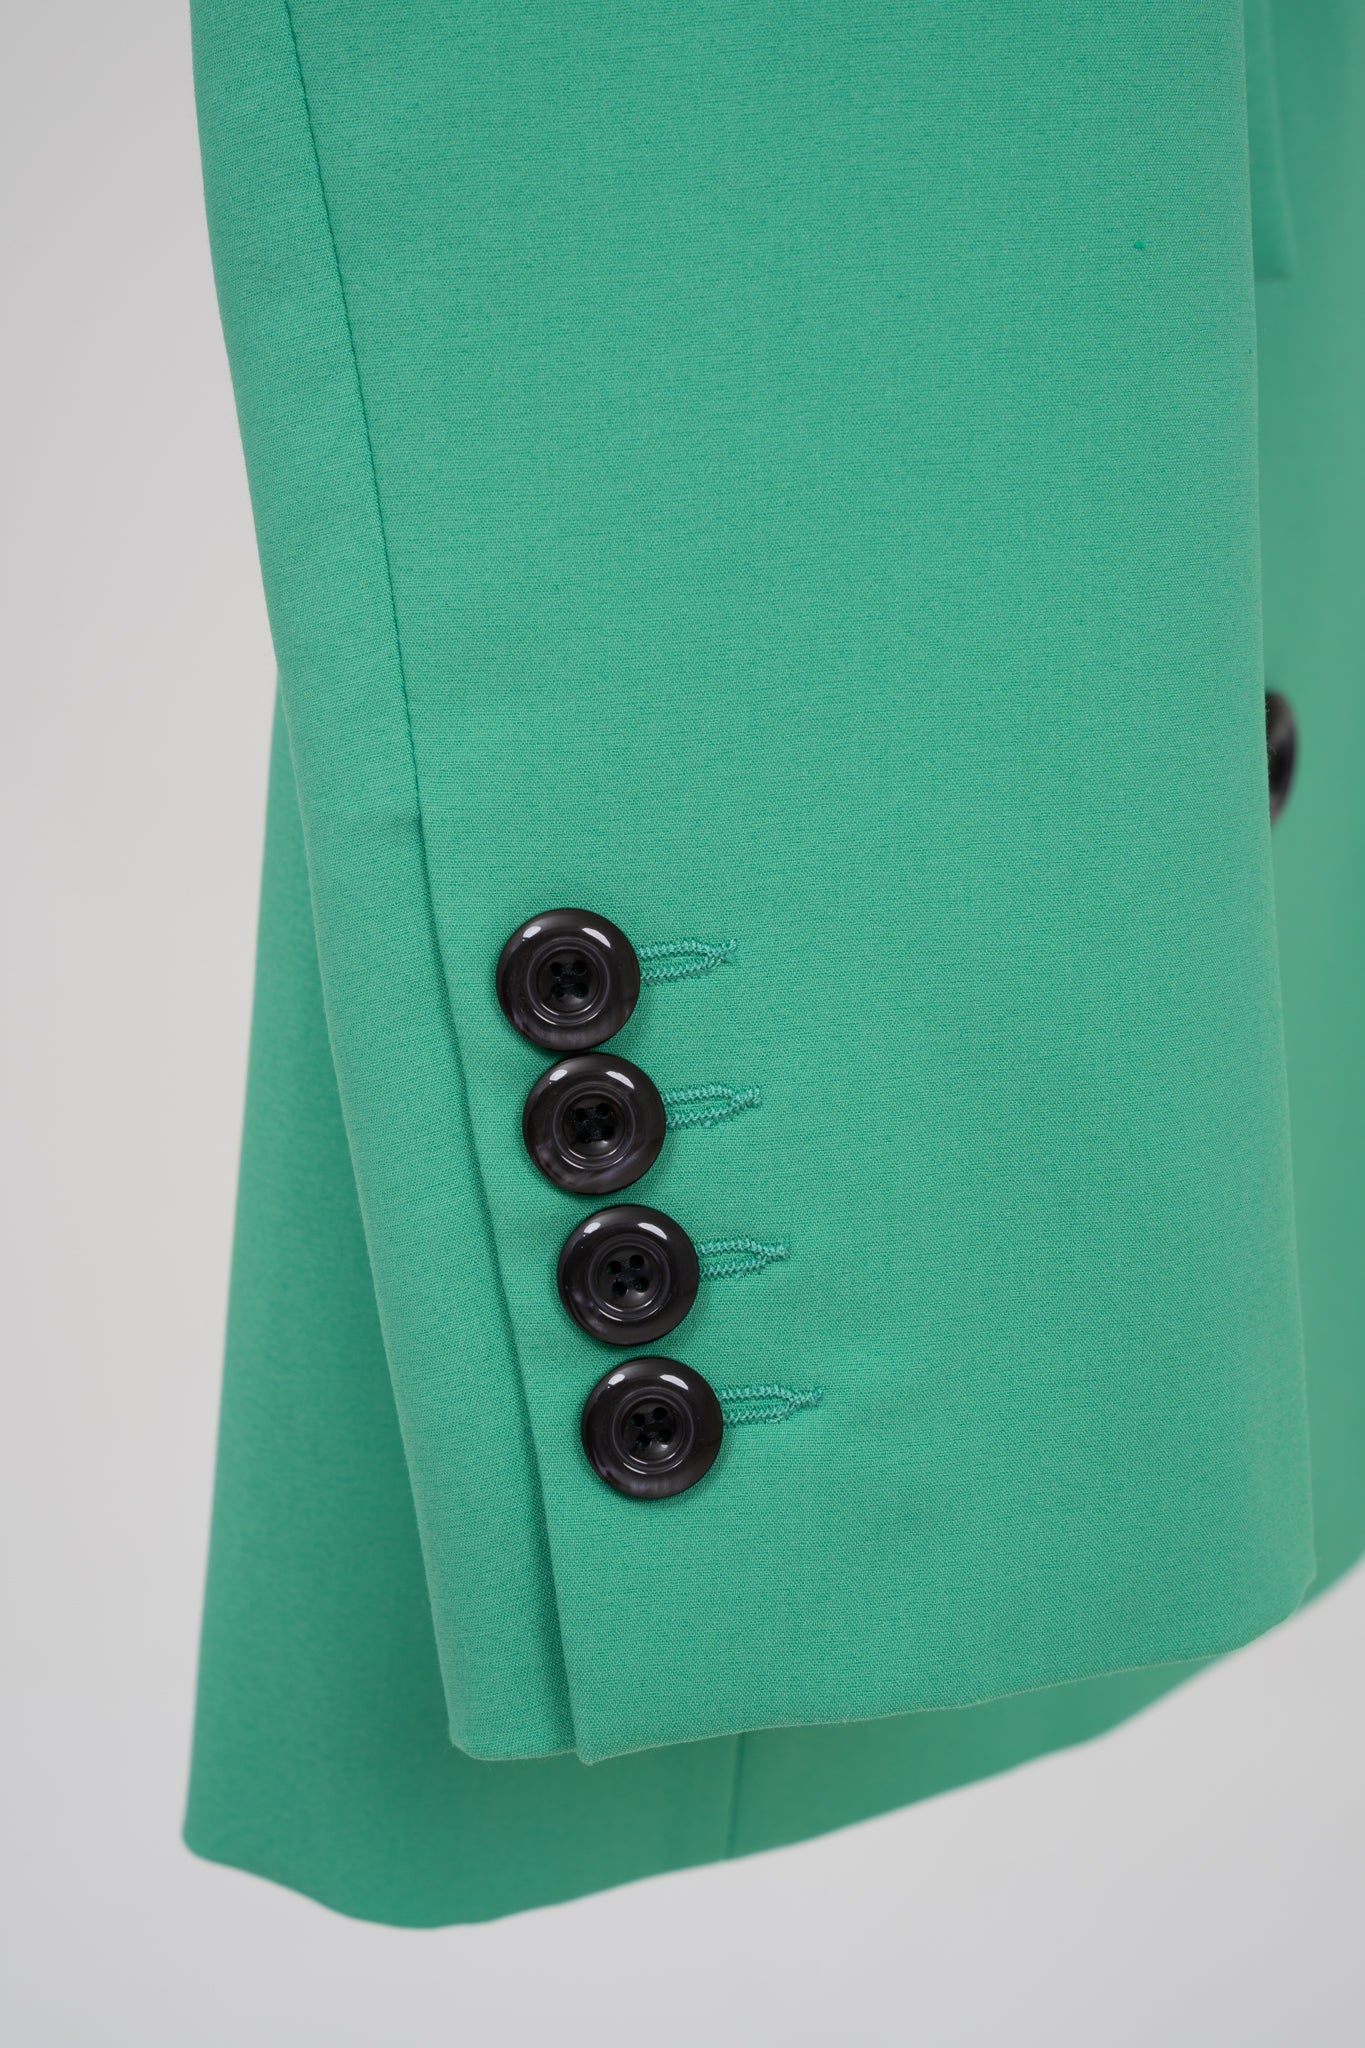 Green Suit, Size S